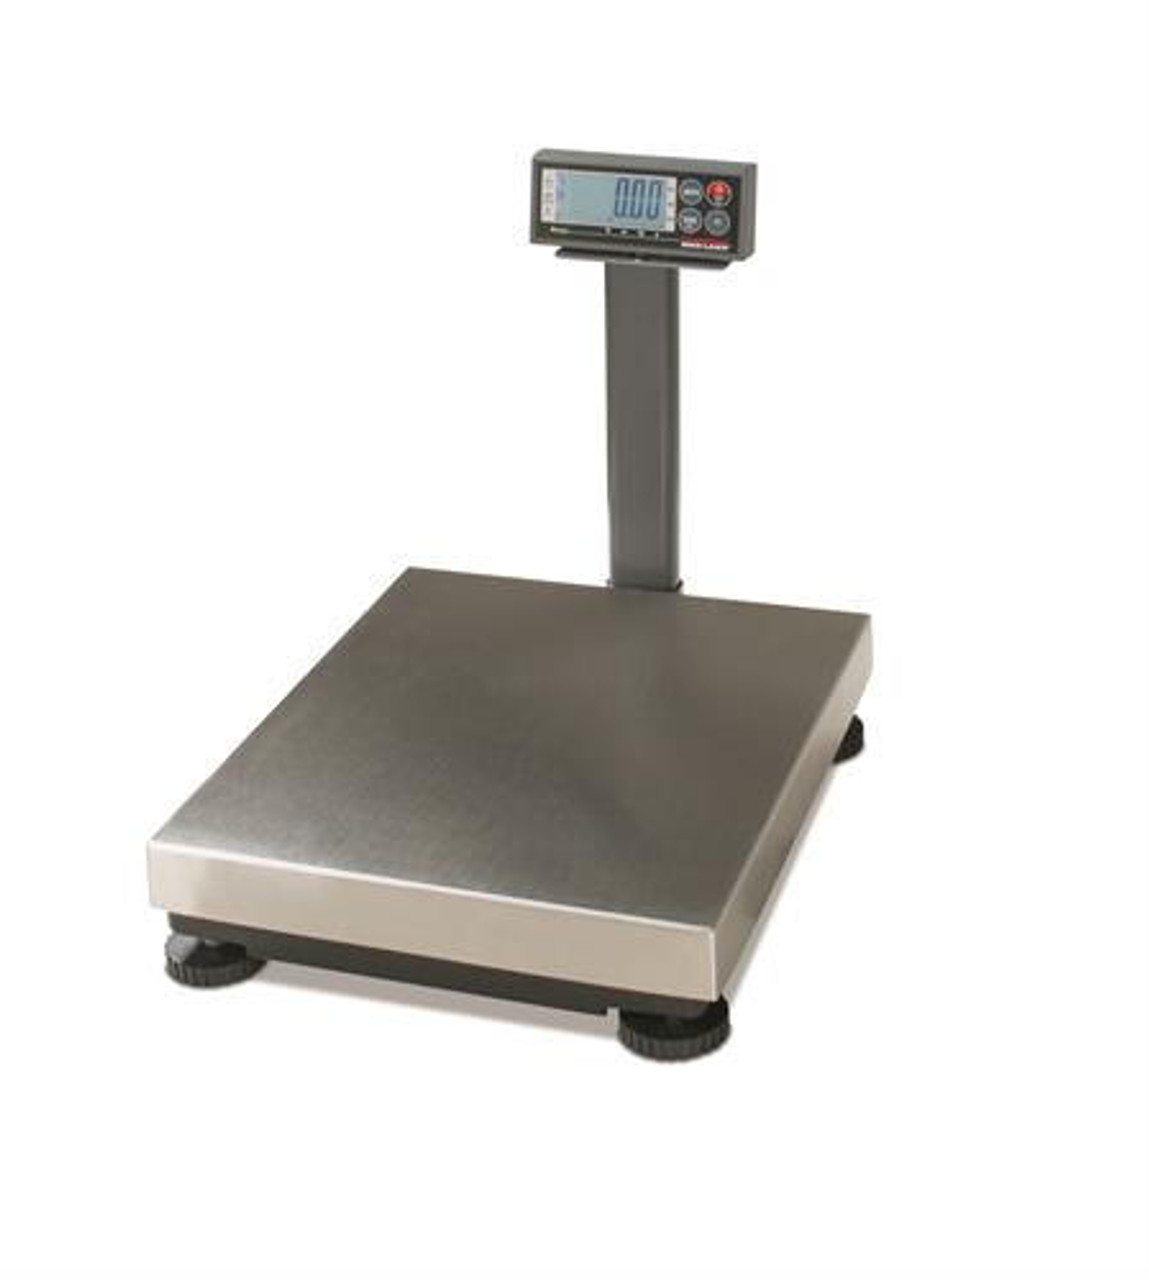 https://cdn11.bigcommerce.com/s-errhy7umuu/images/stencil/1280x1280/products/398/47880/rice-lake-weighing-systems-rice-lake-benchpro-shipping-and-postal-digital-scale-bp-1214-6r-stainless-steel-weight-platter-15-lb-x-0.005-lb-ntep-class-iii__66835.1674841757.jpg?c=2